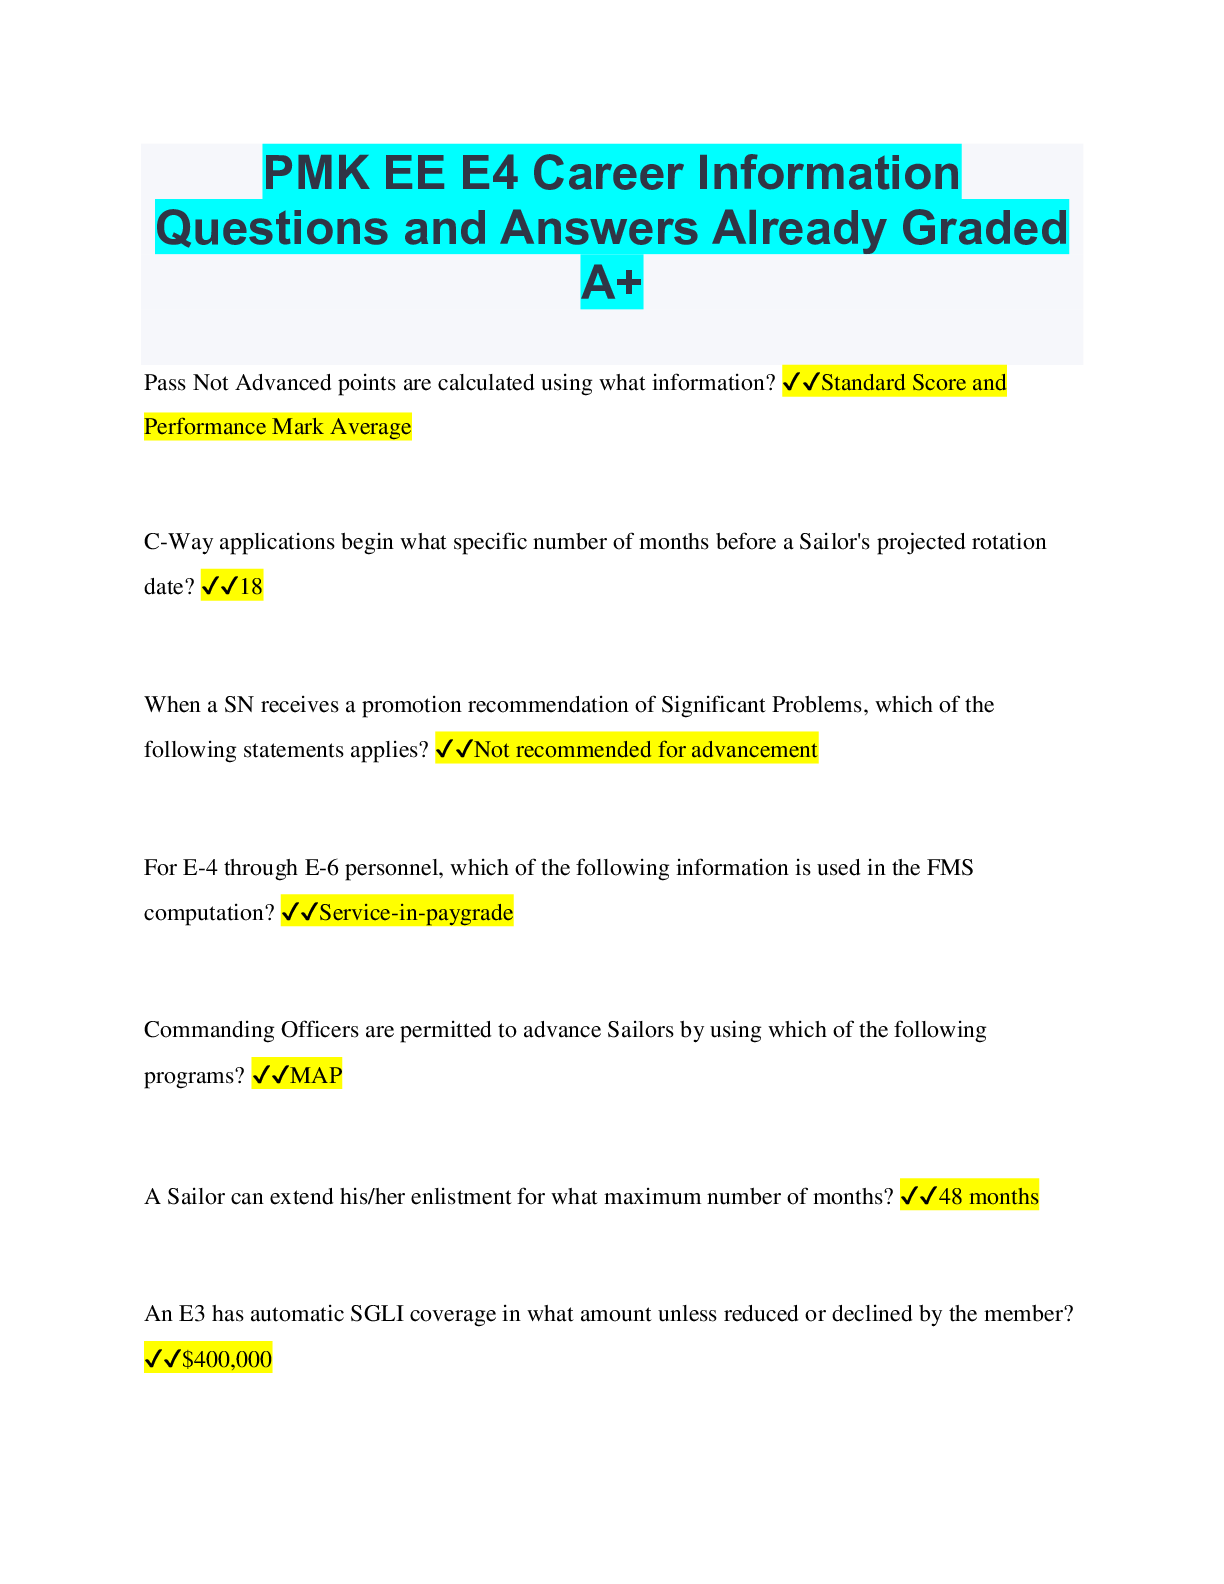 PMK EE E4 Career Information Questions and Answers Already Graded A+